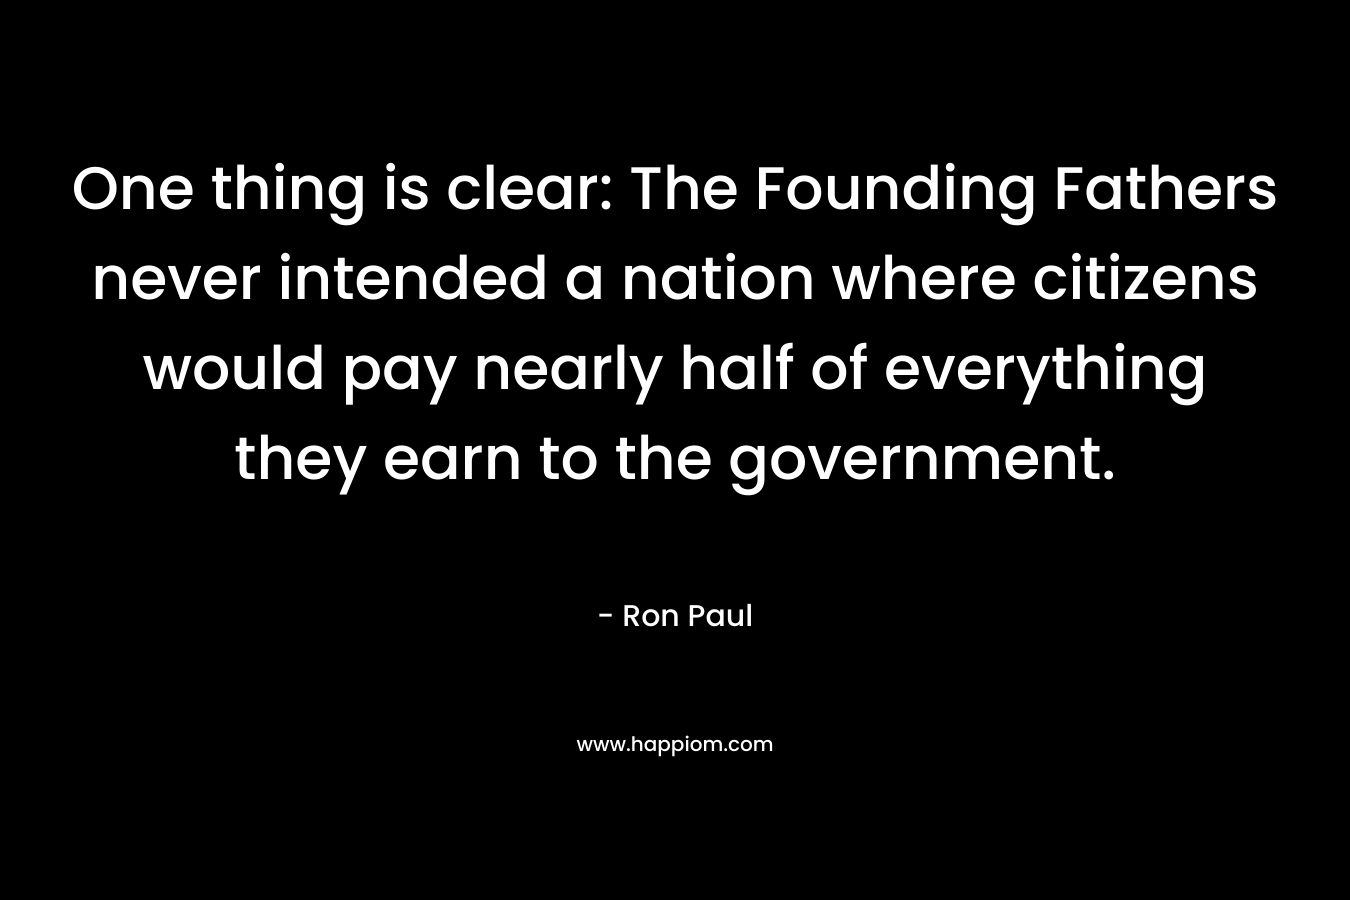 One thing is clear: The Founding Fathers never intended a nation where citizens would pay nearly half of everything they earn to the government. – Ron Paul